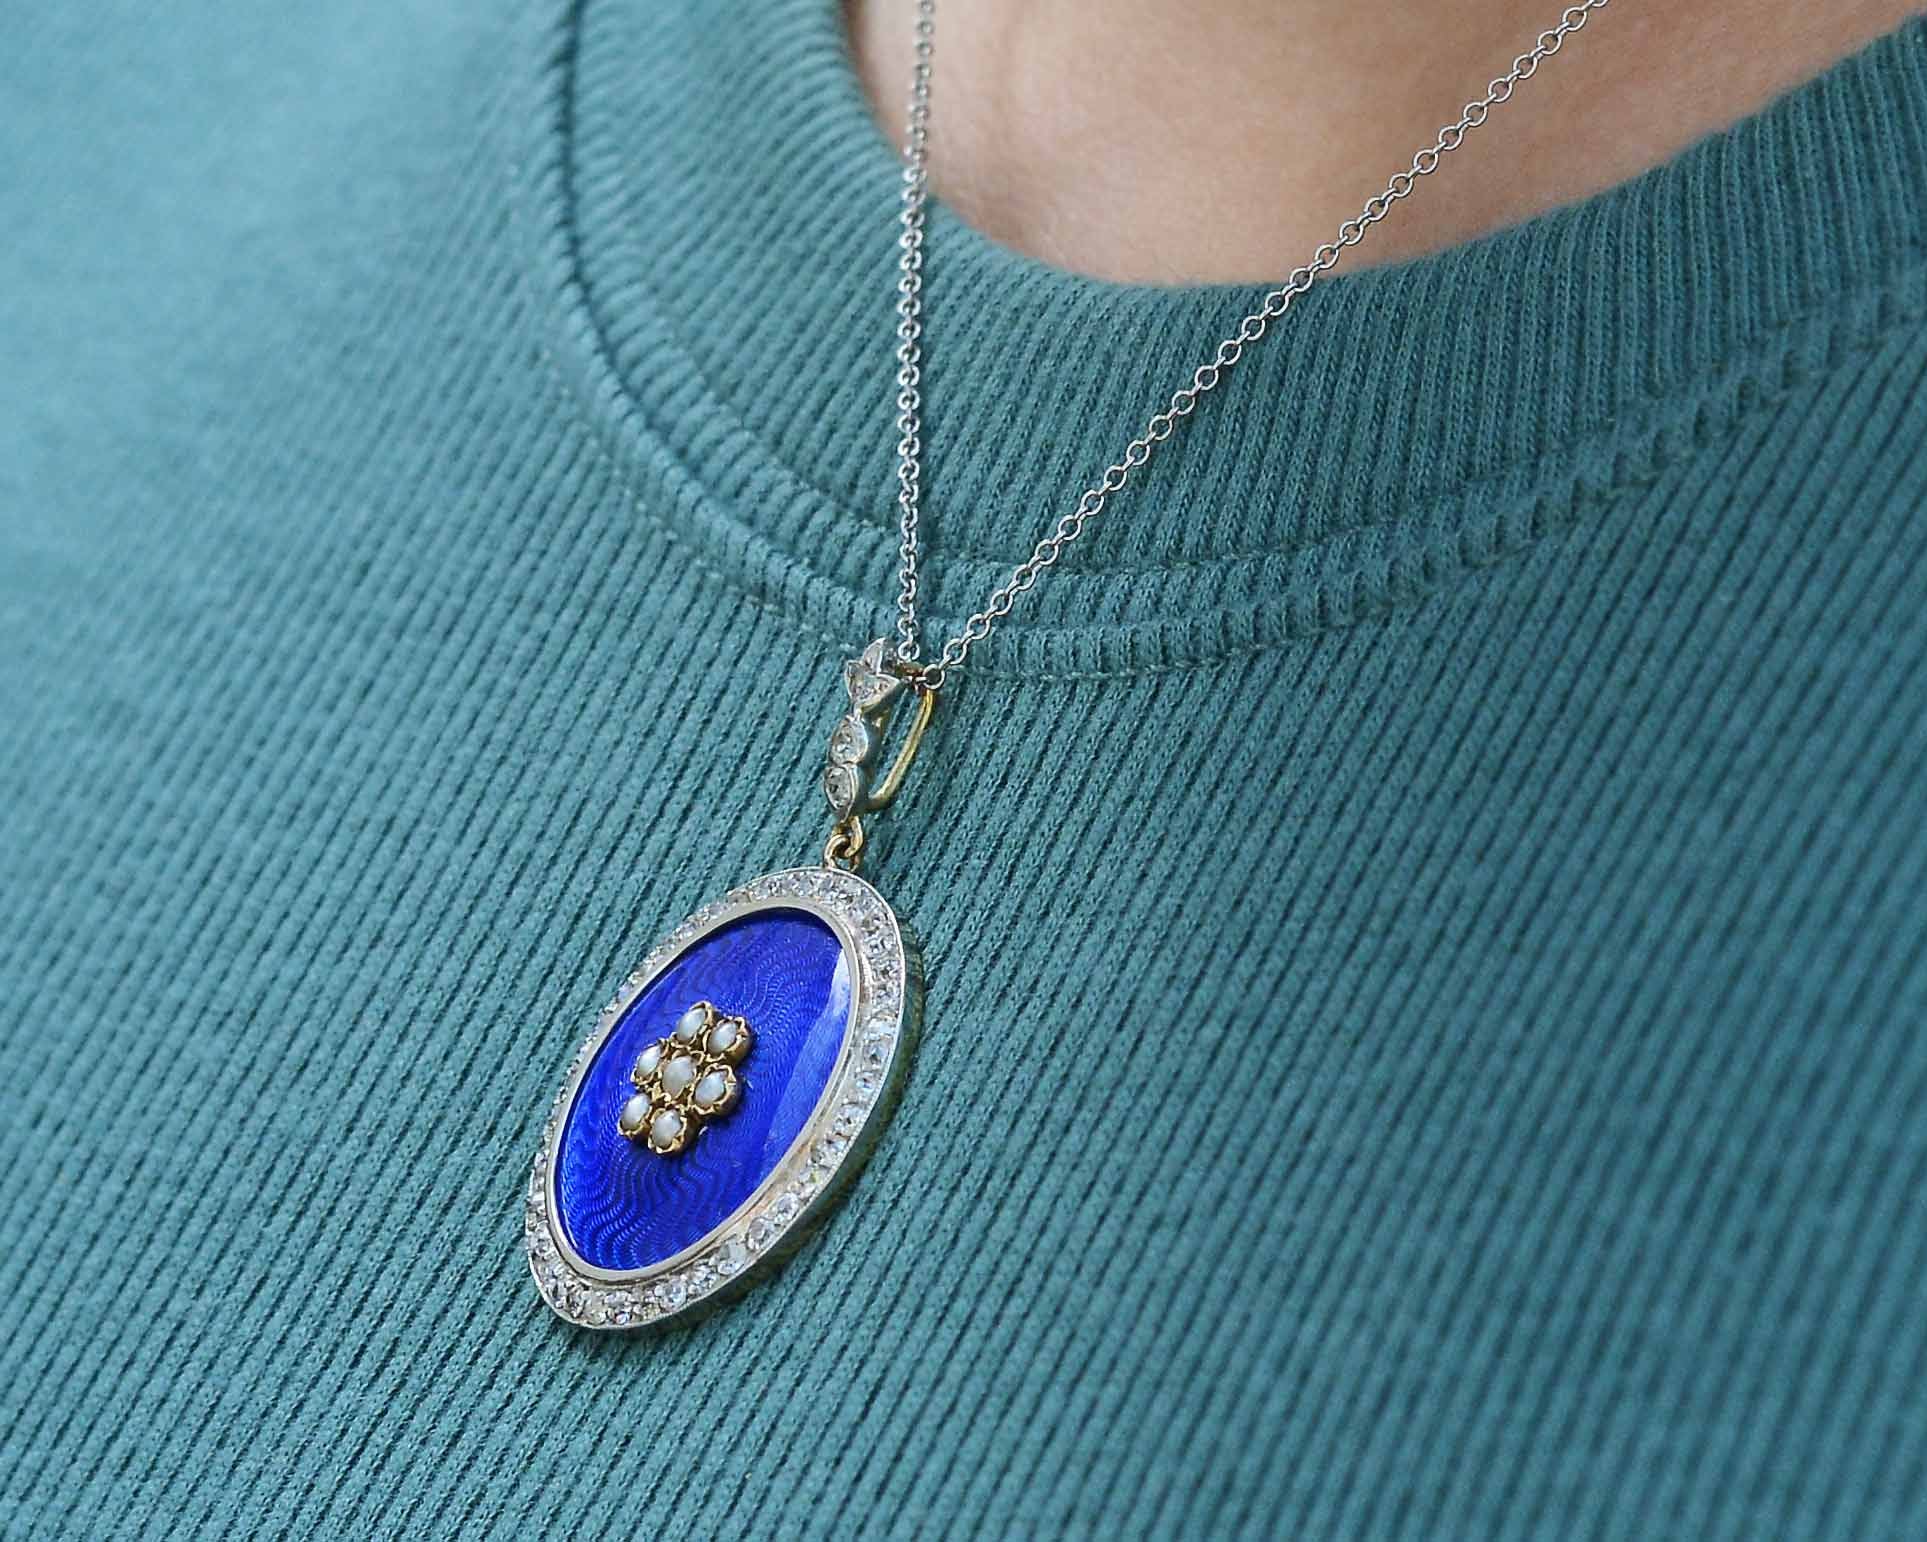 Rich, shimmering royal blue enamel lines this diamond halo pendant necklace.